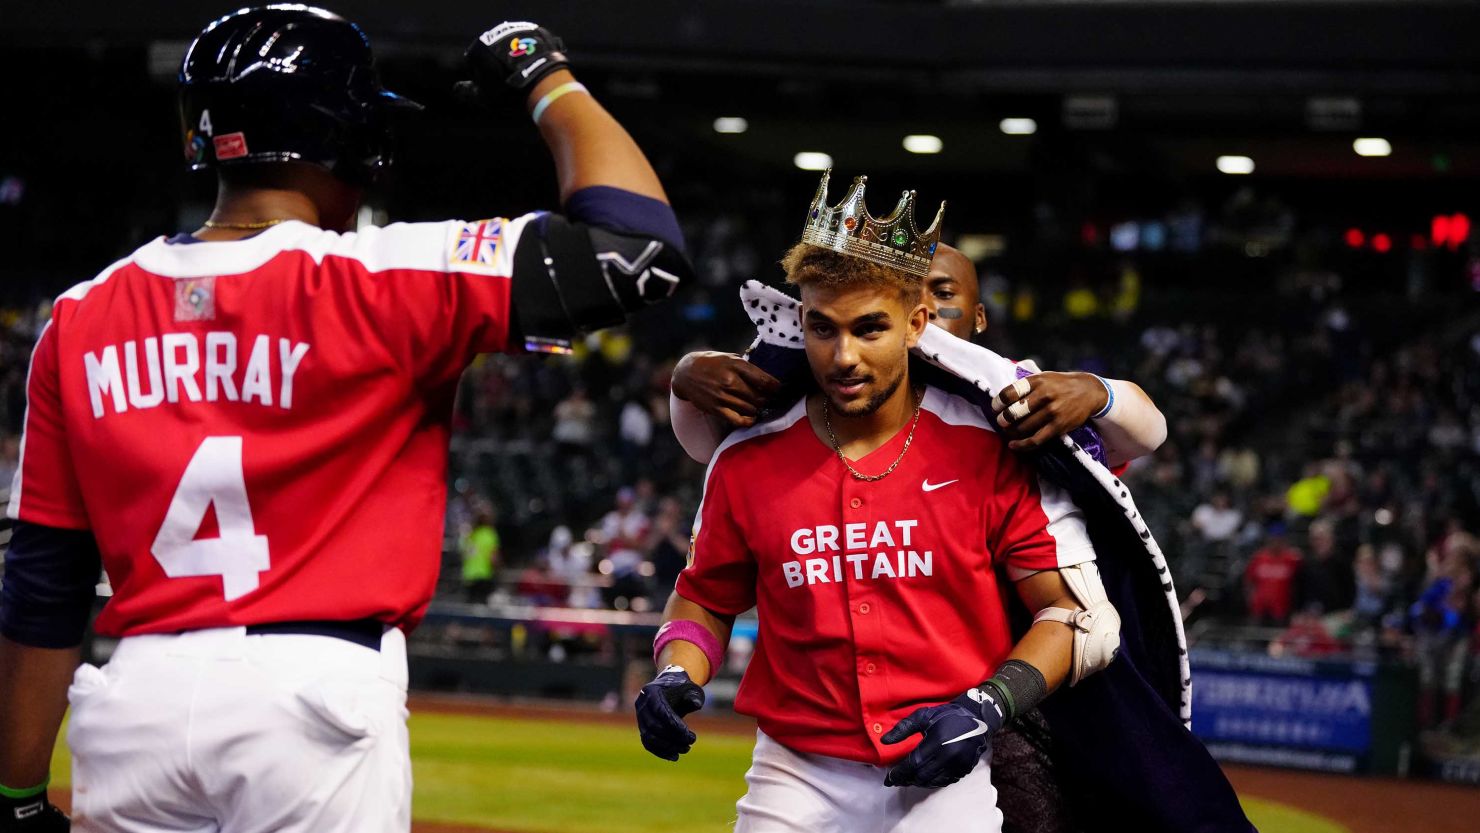 Long live the King! Harry Ford is becoming one of the faces of British baseball and scored a vital home run as GB beat Colombia.